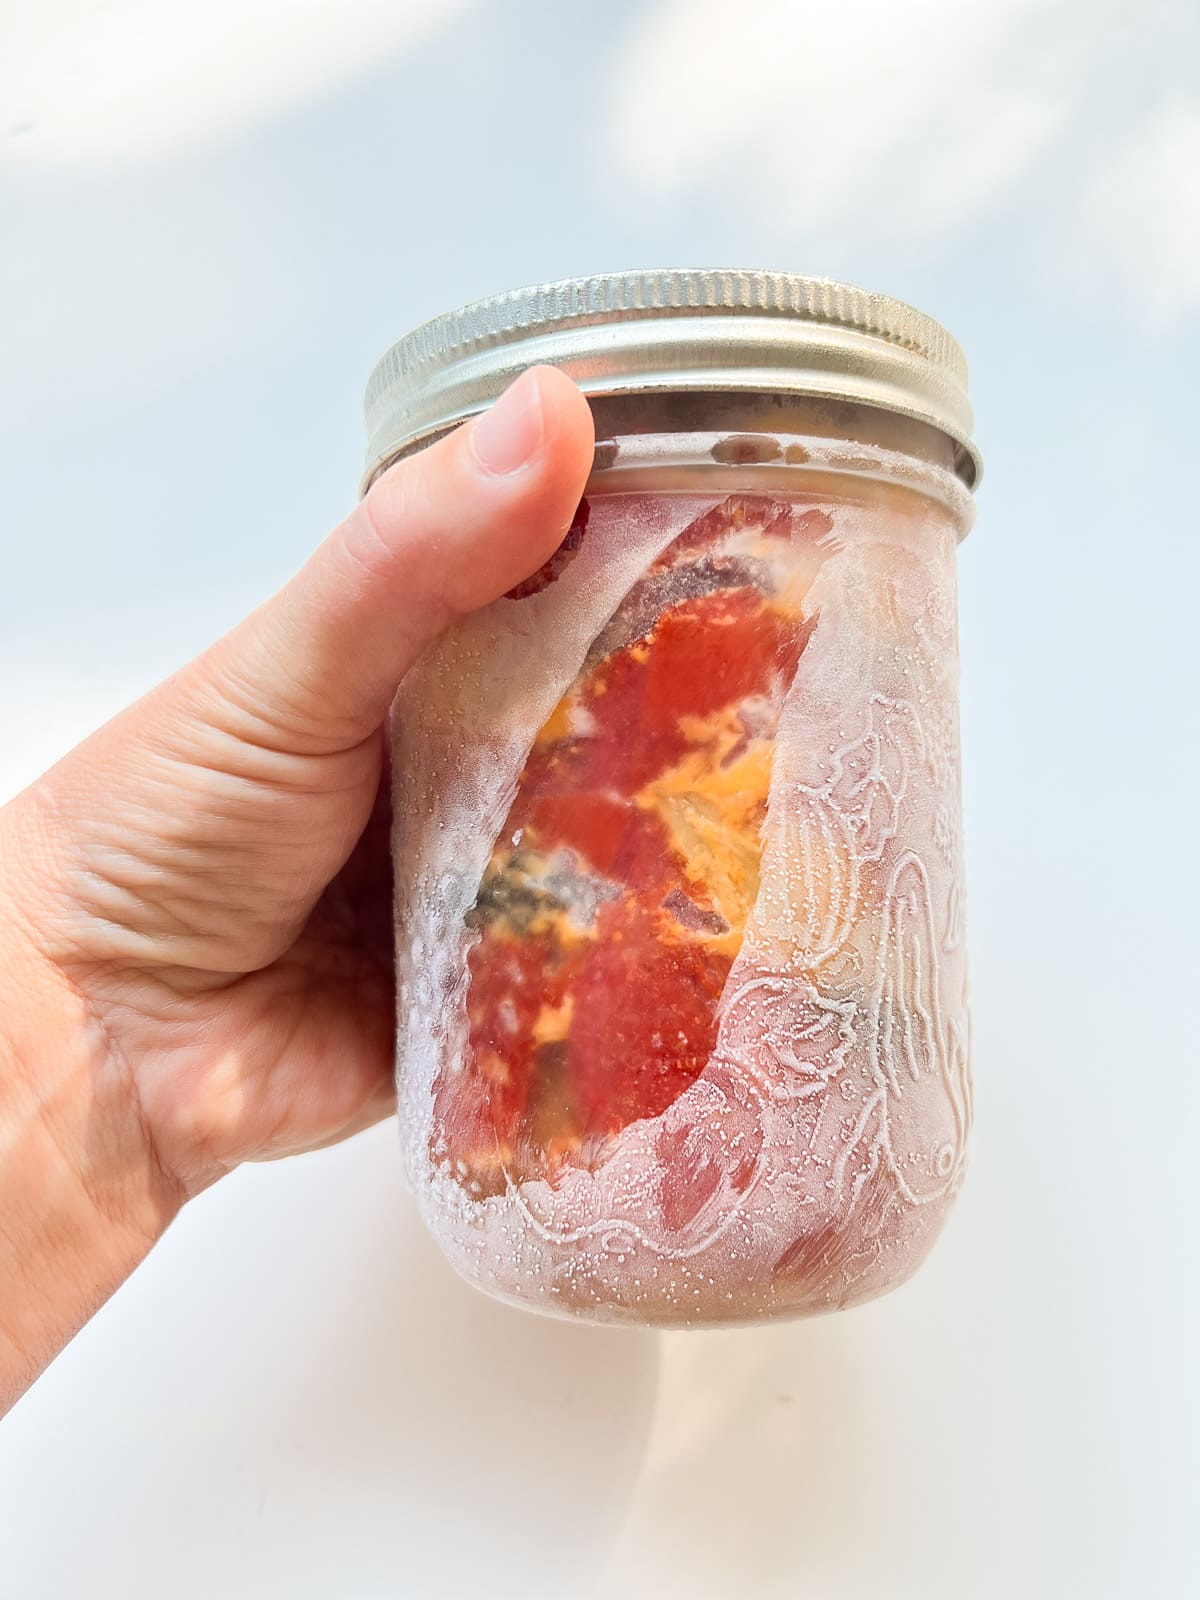 An image of half a batch of Oven Roasted Tomatoes frozen in a glass jar - the jar is being held by a woman's hand.